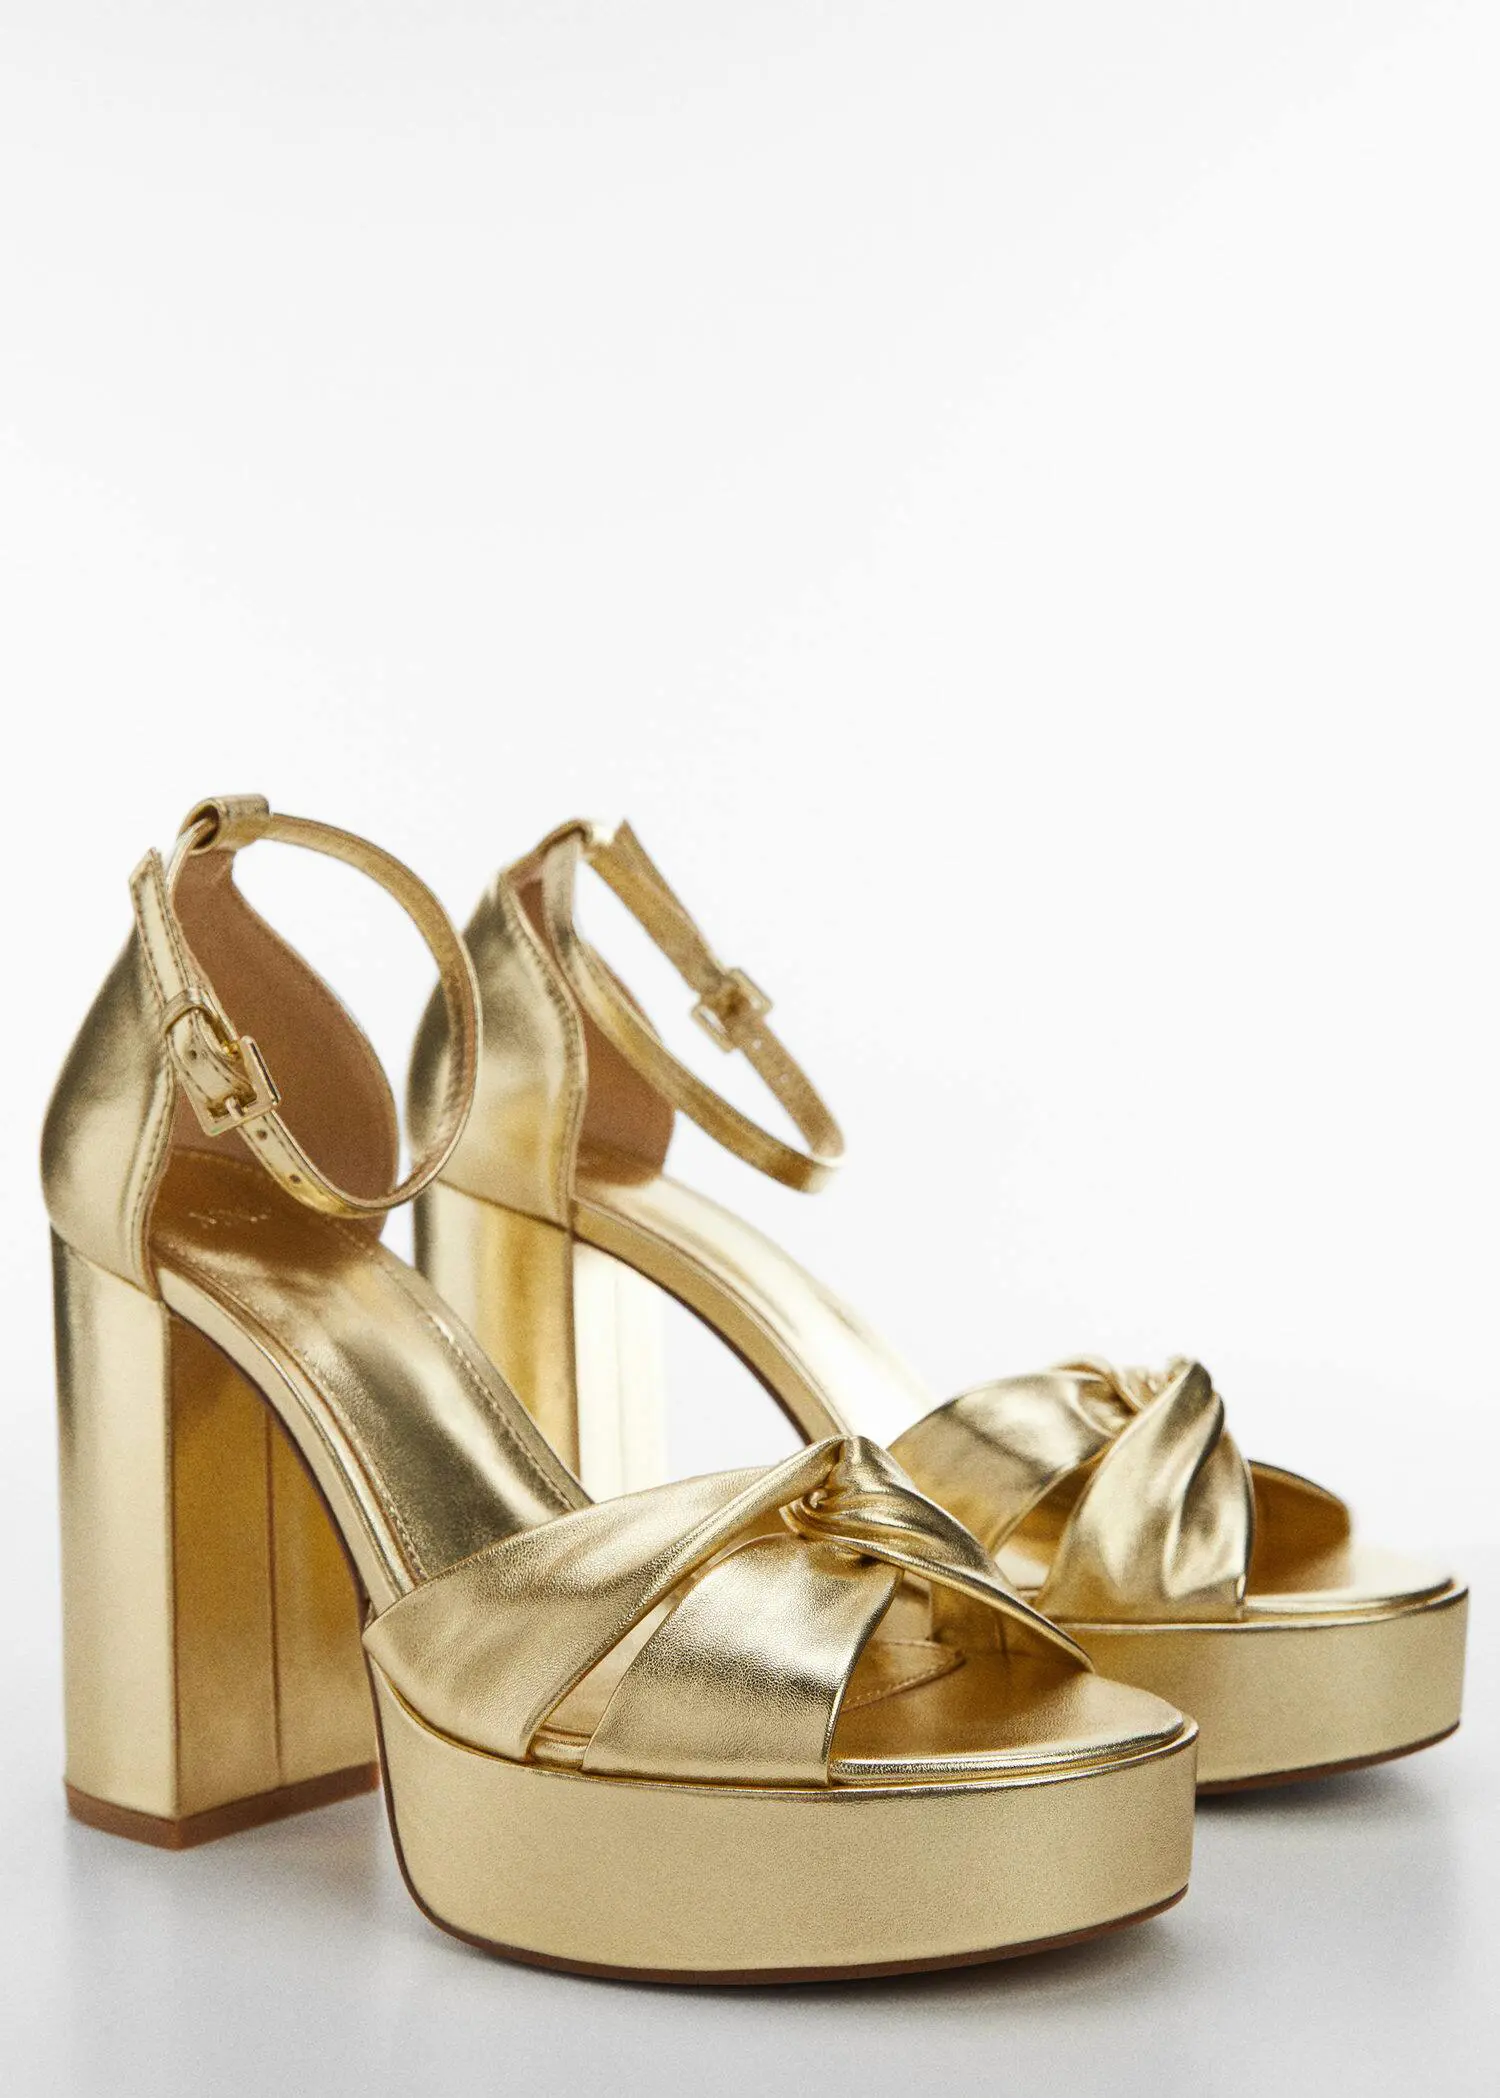 Mango Metallic heel sandals. a pair of gold shoes on a white background 